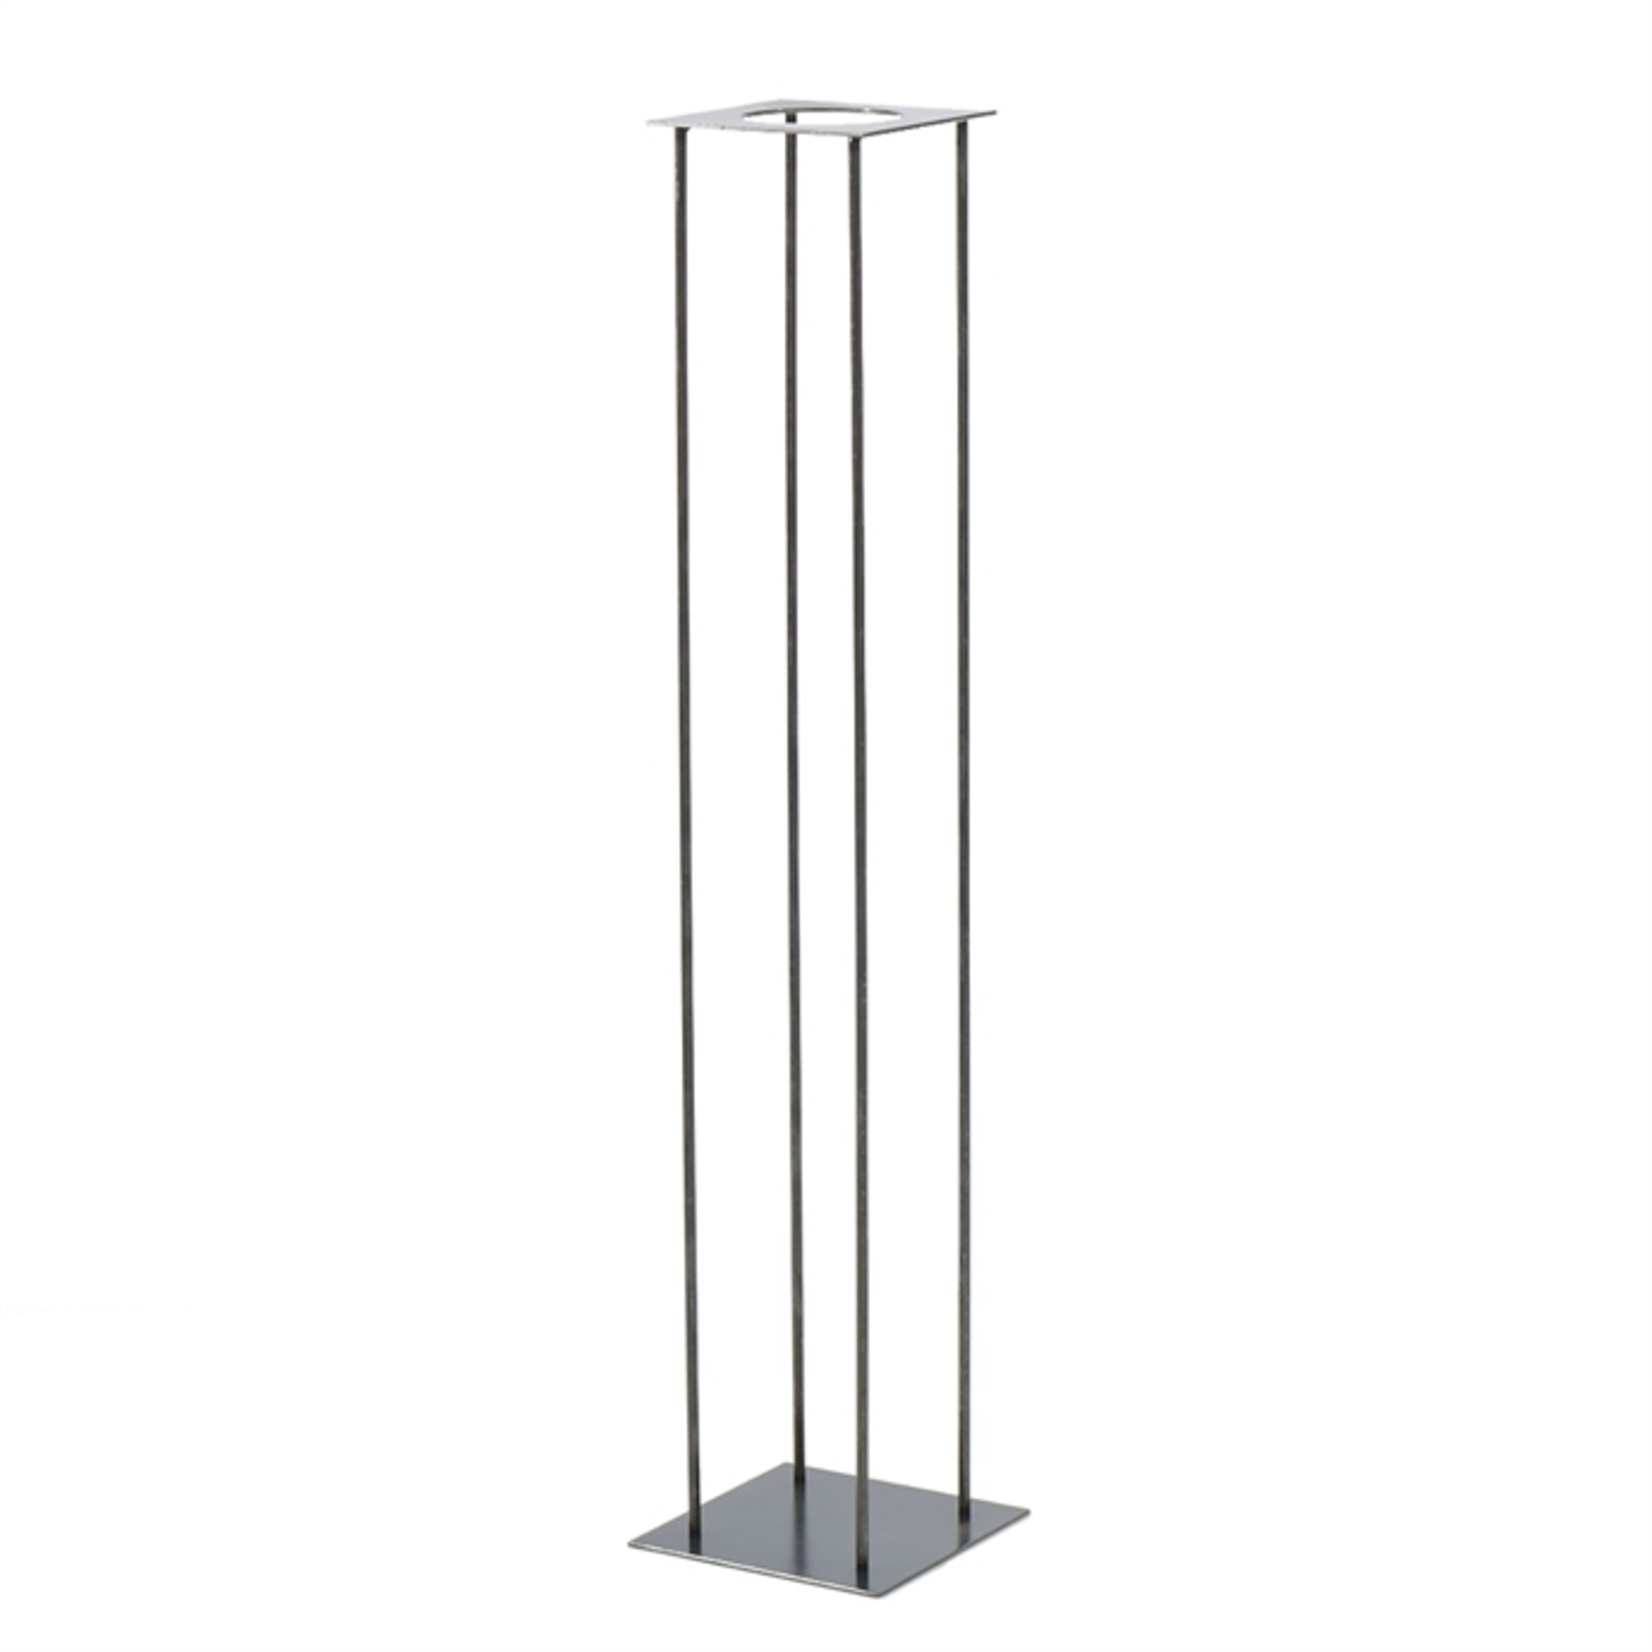 45” X8” X 8” SILVER HARLOW STAND (AD)